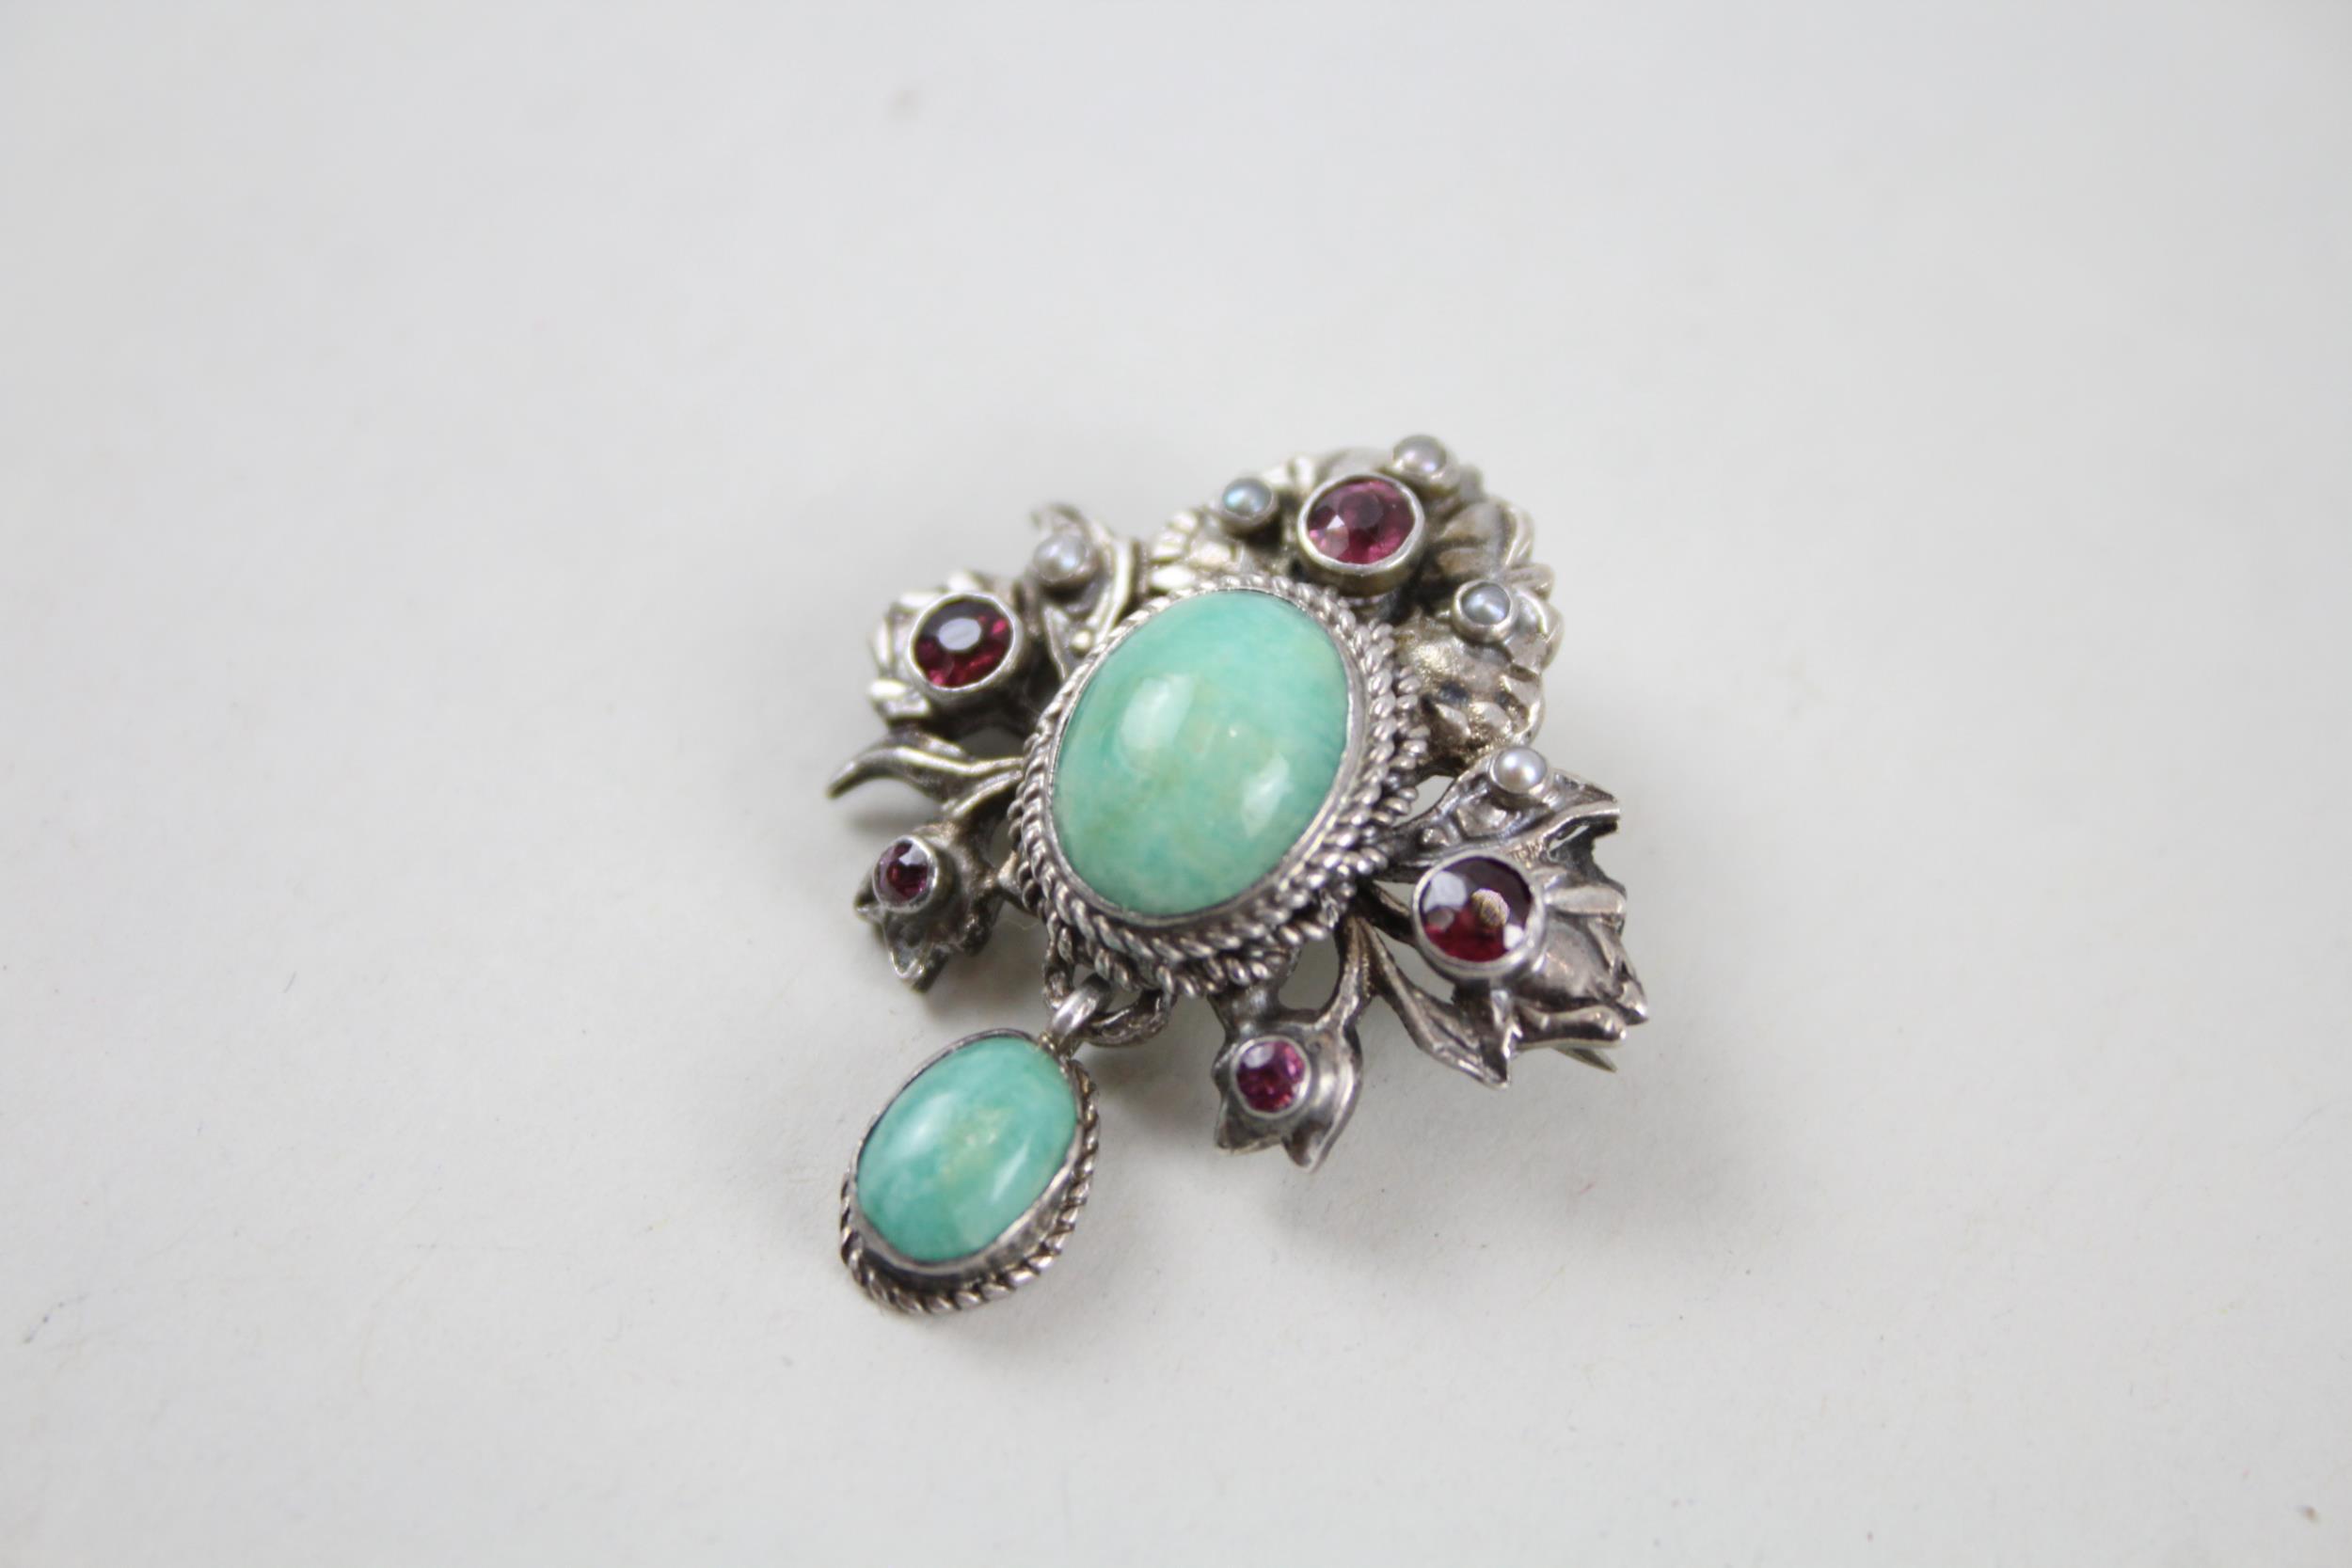 Silver Austro-Hungarian brooch set with gemstone and seed pearl (6g) - Image 6 of 9